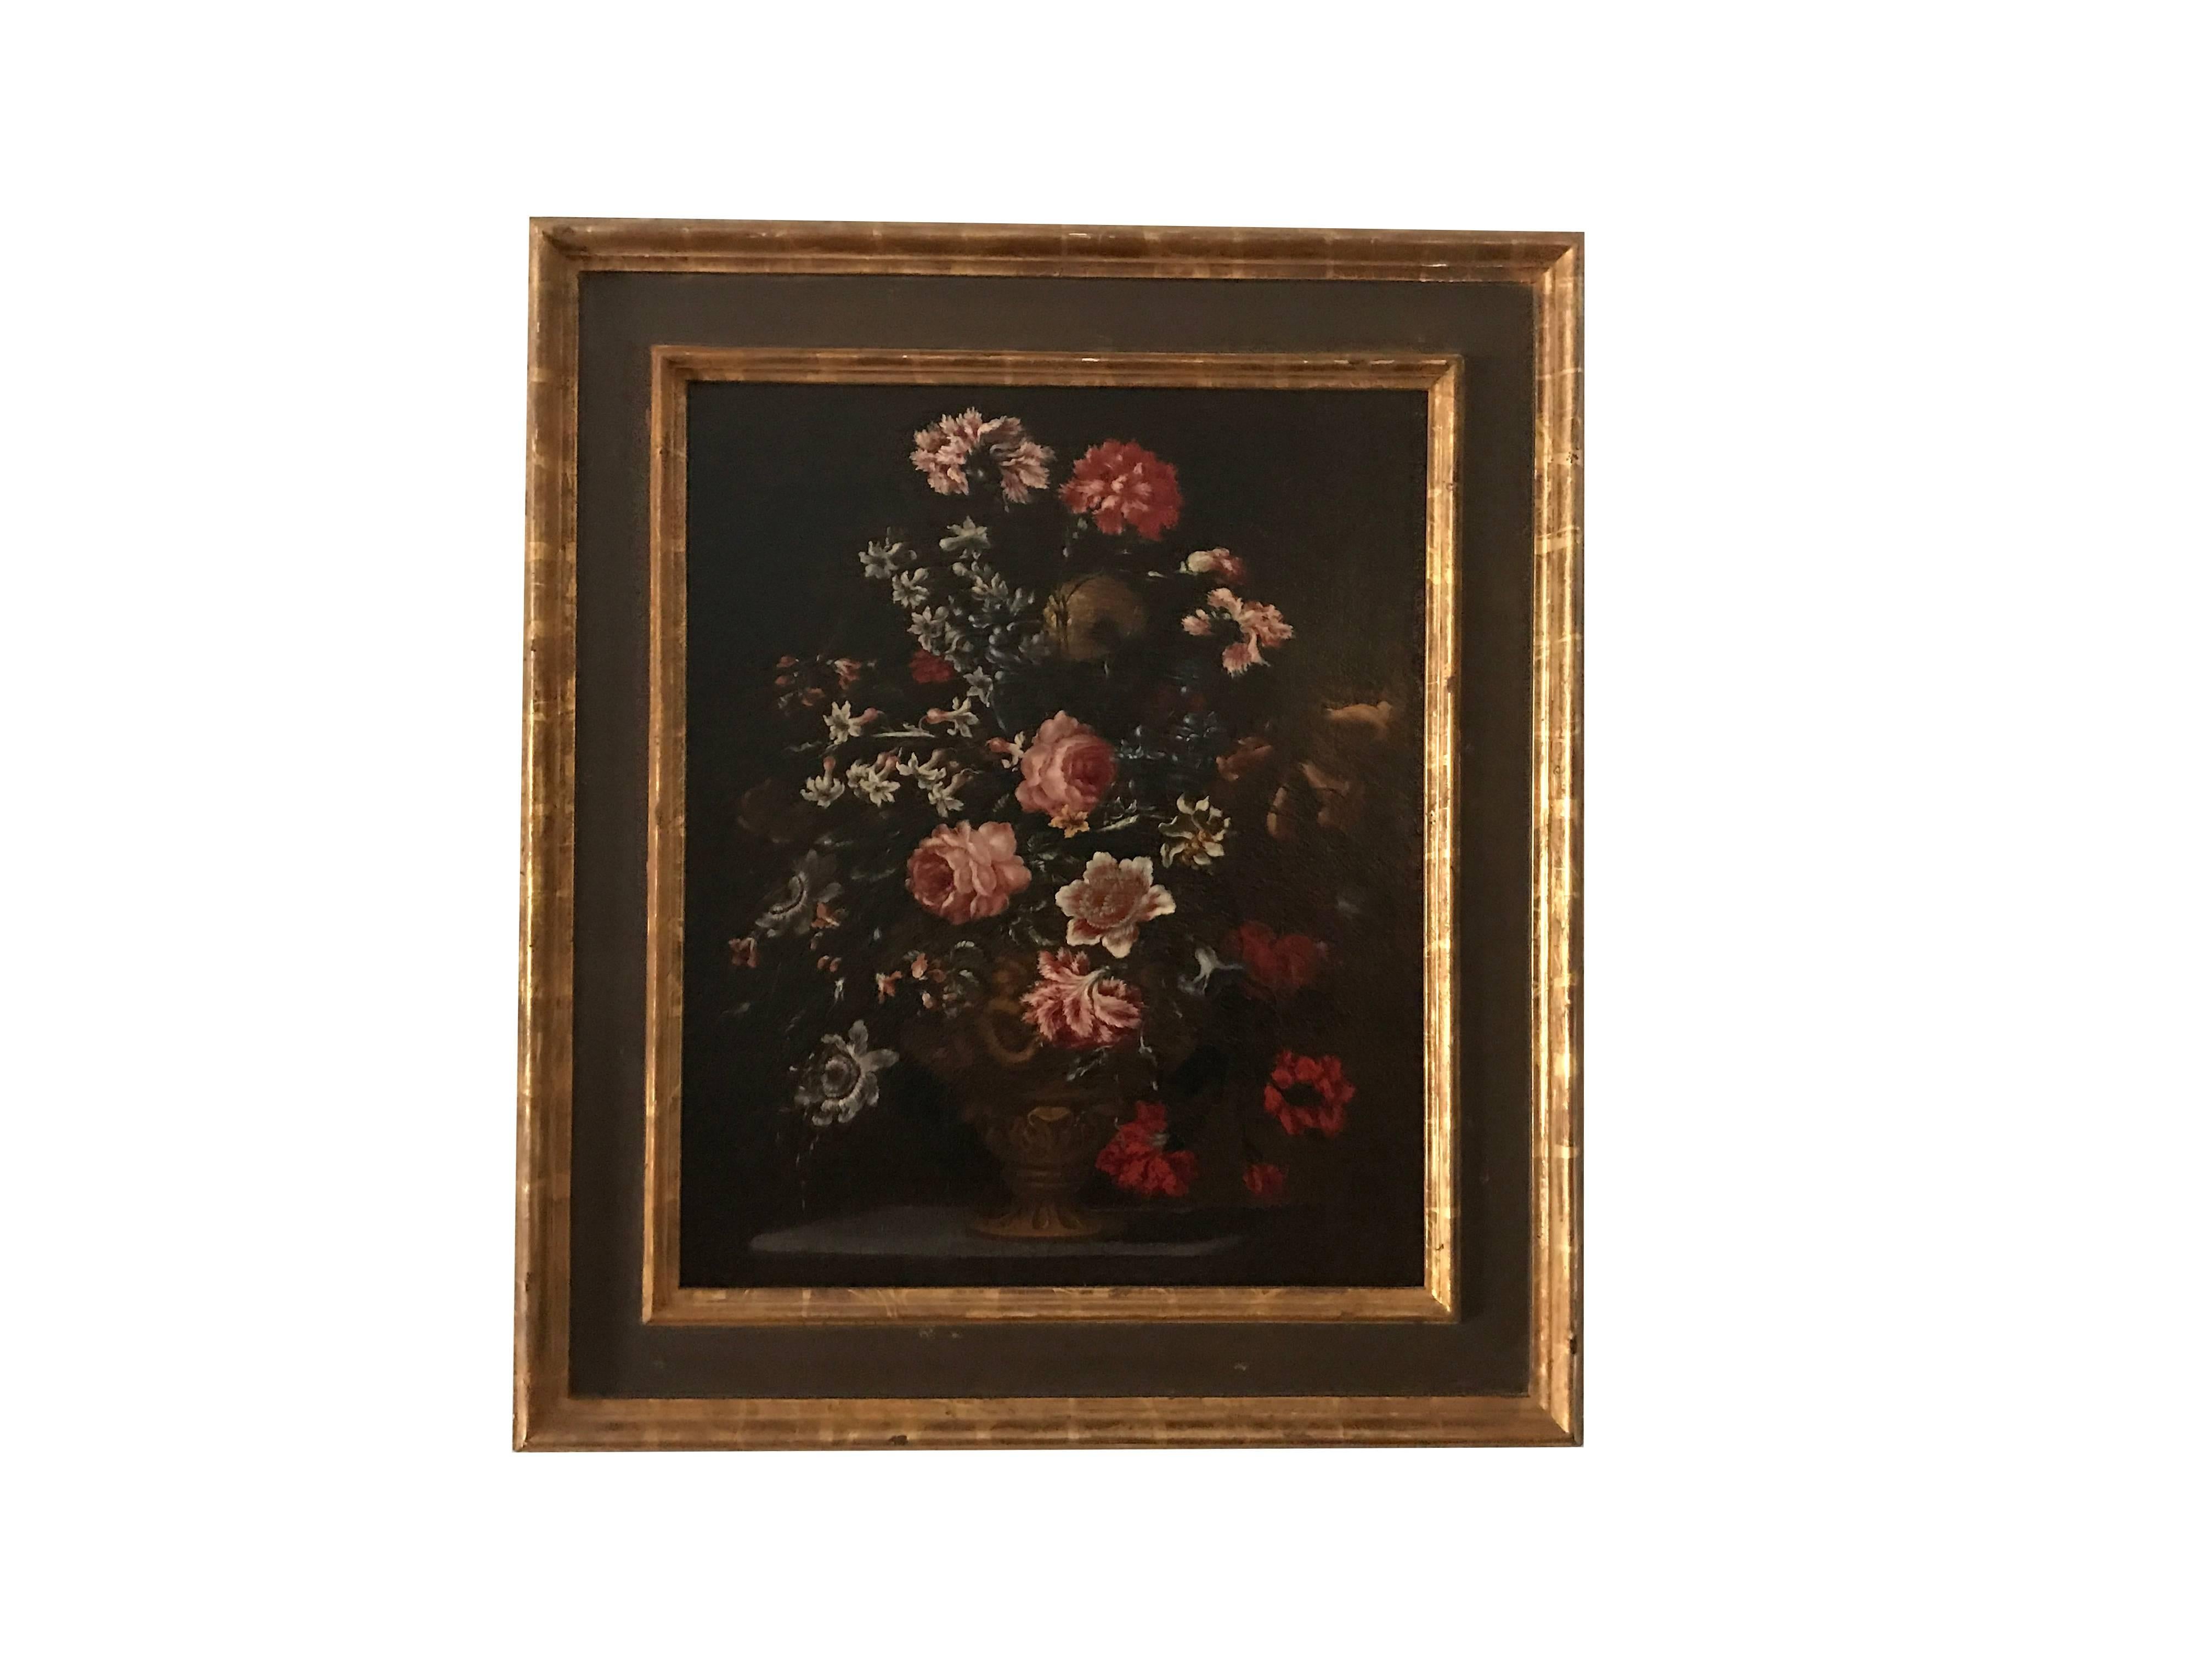 Bartolomeo Bimbi and workshop (1648-1723) bouquet of Carnations, “Multi-Petal” Roses, Hyacinths, “Coronary” Anemones, Scarlet Catryophyllaceae and Convolvulaceaous plants in an embossed metal vase”. Oil on canvas

Size: Framed 38 ½” high x 33 ½”